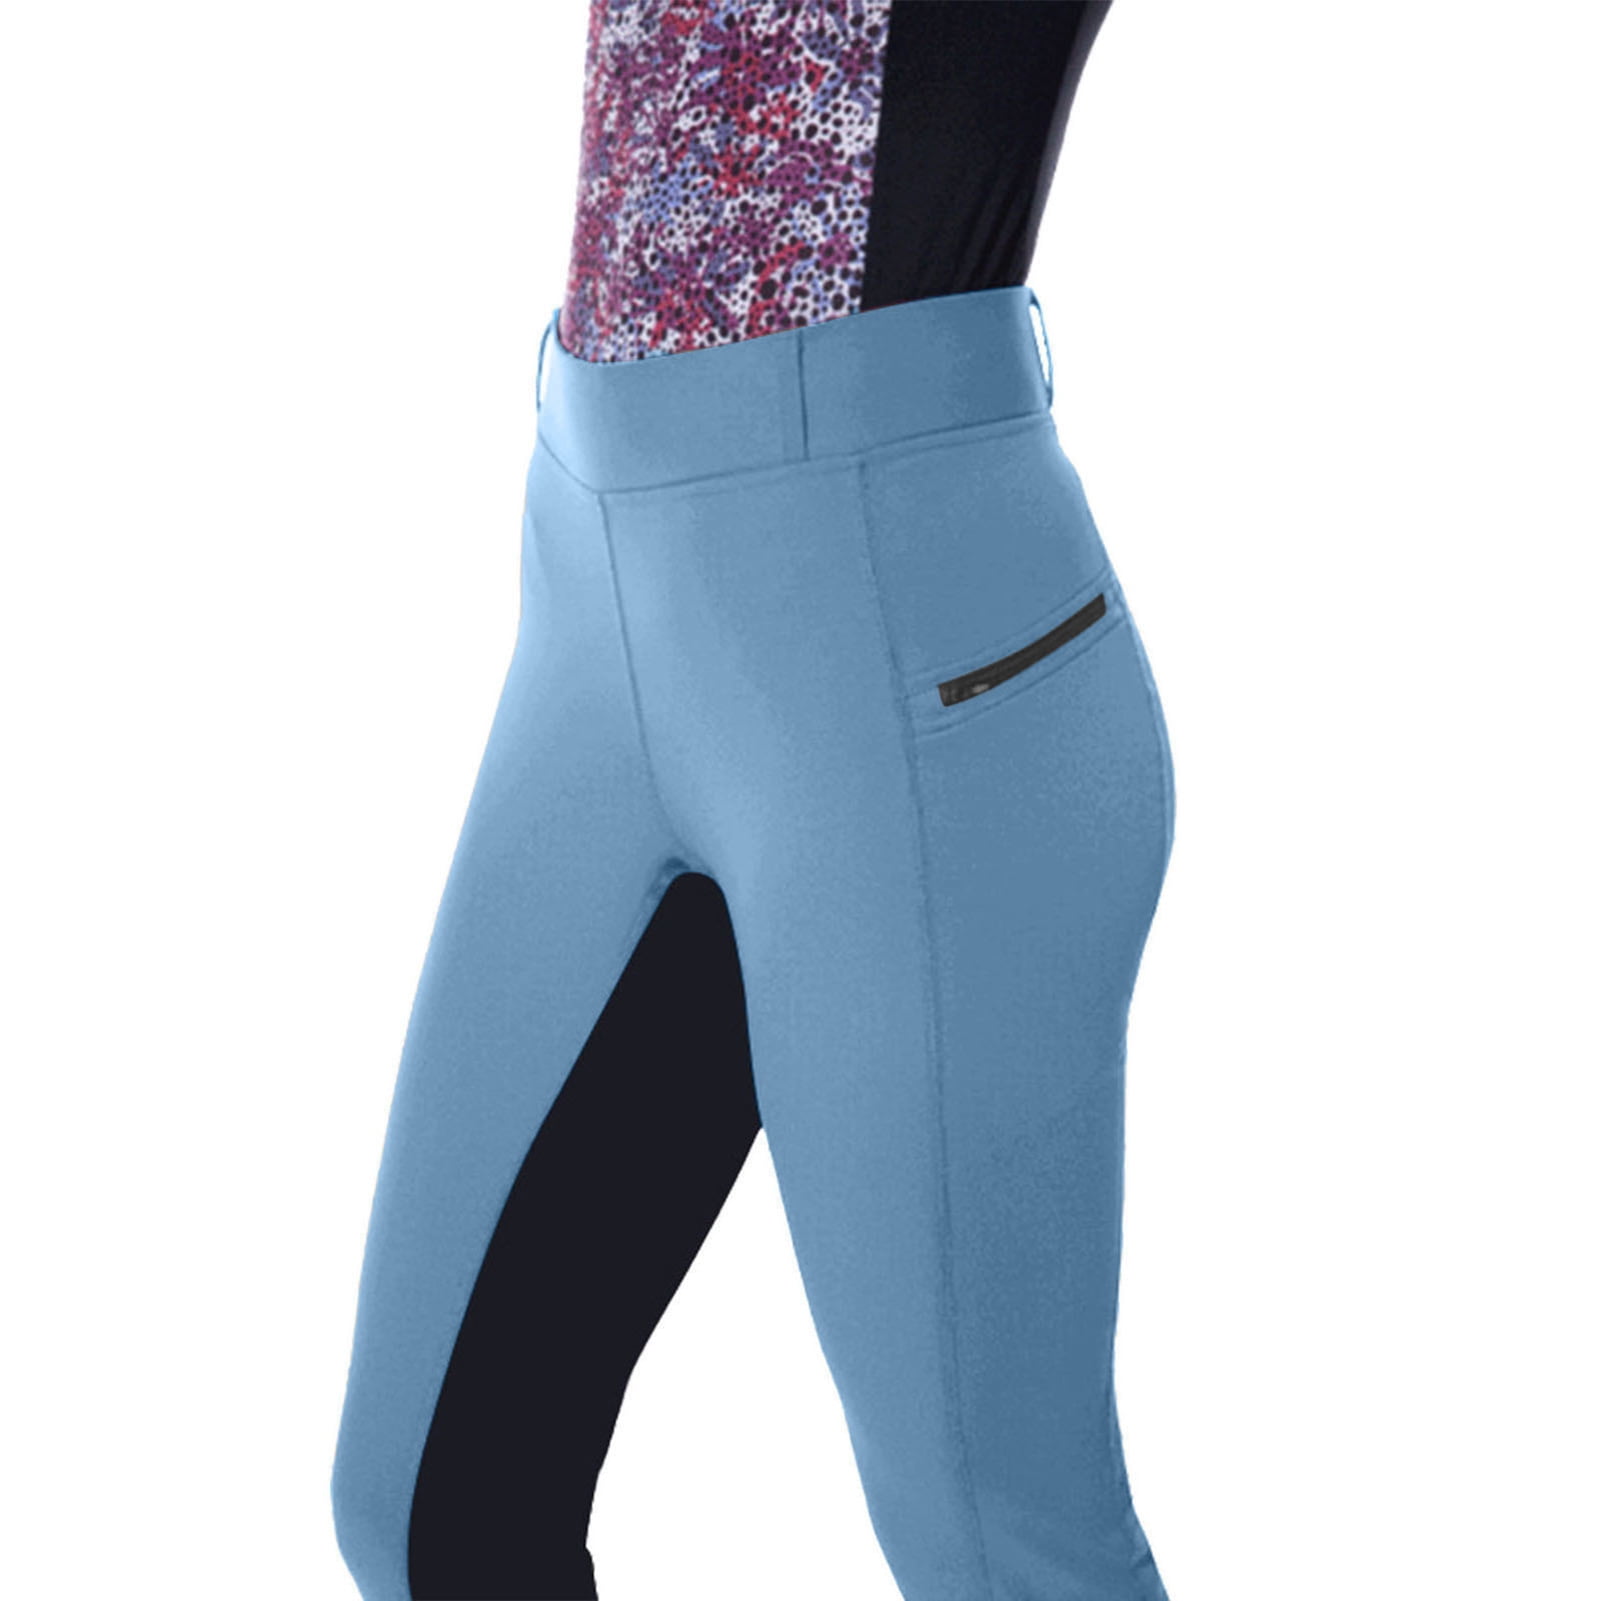 Womens Slim Fit Horse Riding Ladies Fleece Lined Leggings For Fitness And  Equestrian Riding Skinny Trouser For Horse Riders, Plus Size Available  LJ201130 From Kong04, $22.85